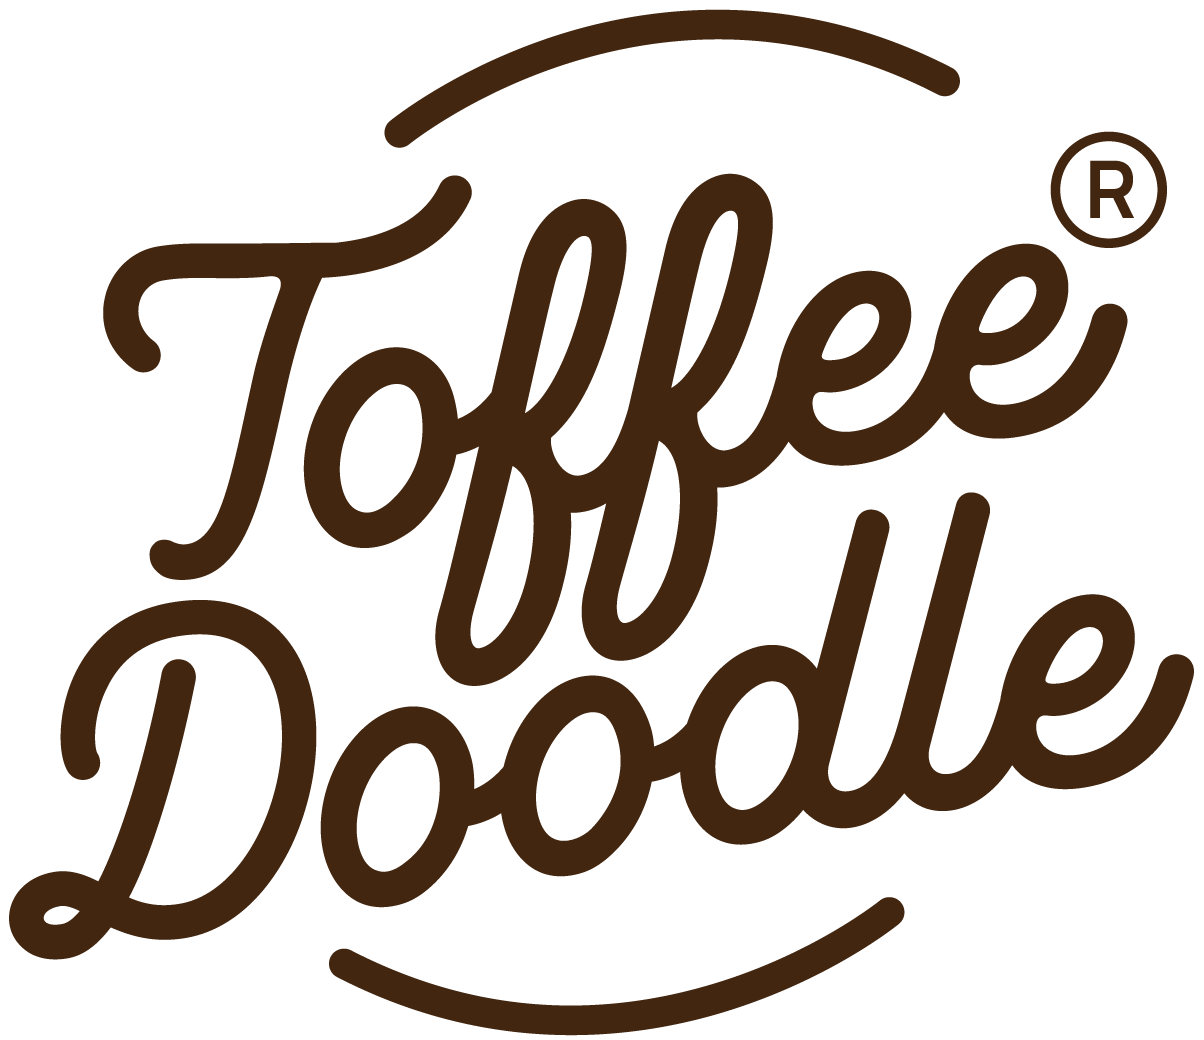 Toffee Doodle